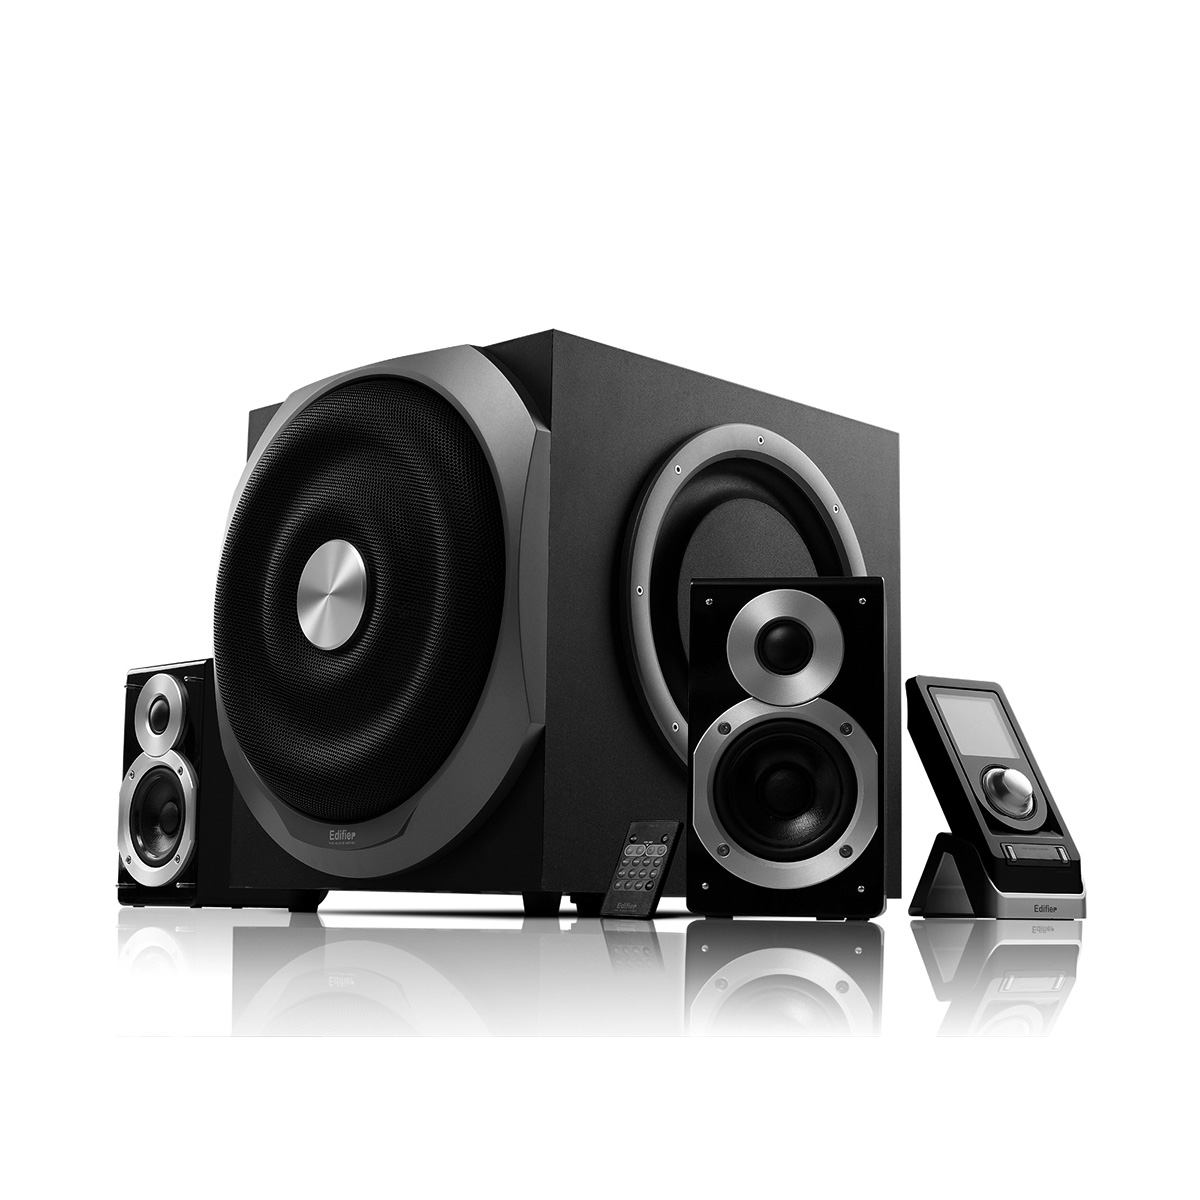 S730 - 2.1 speakers with 10 inch 